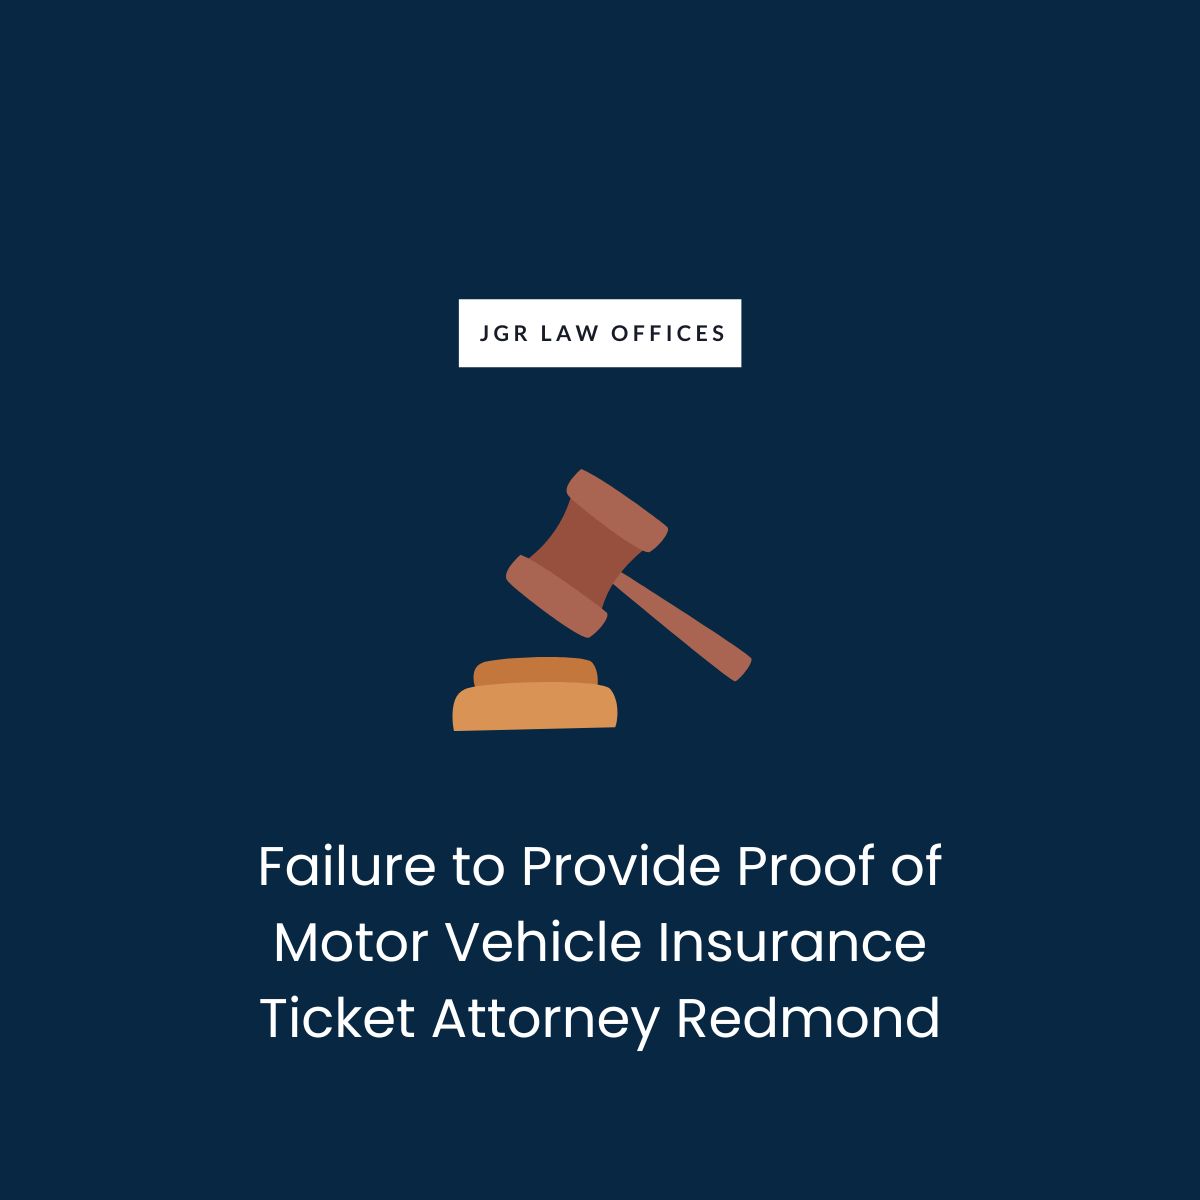 Failure to Provide Proof of Motor Vehicle Insurance Ticket Attorney Redmond